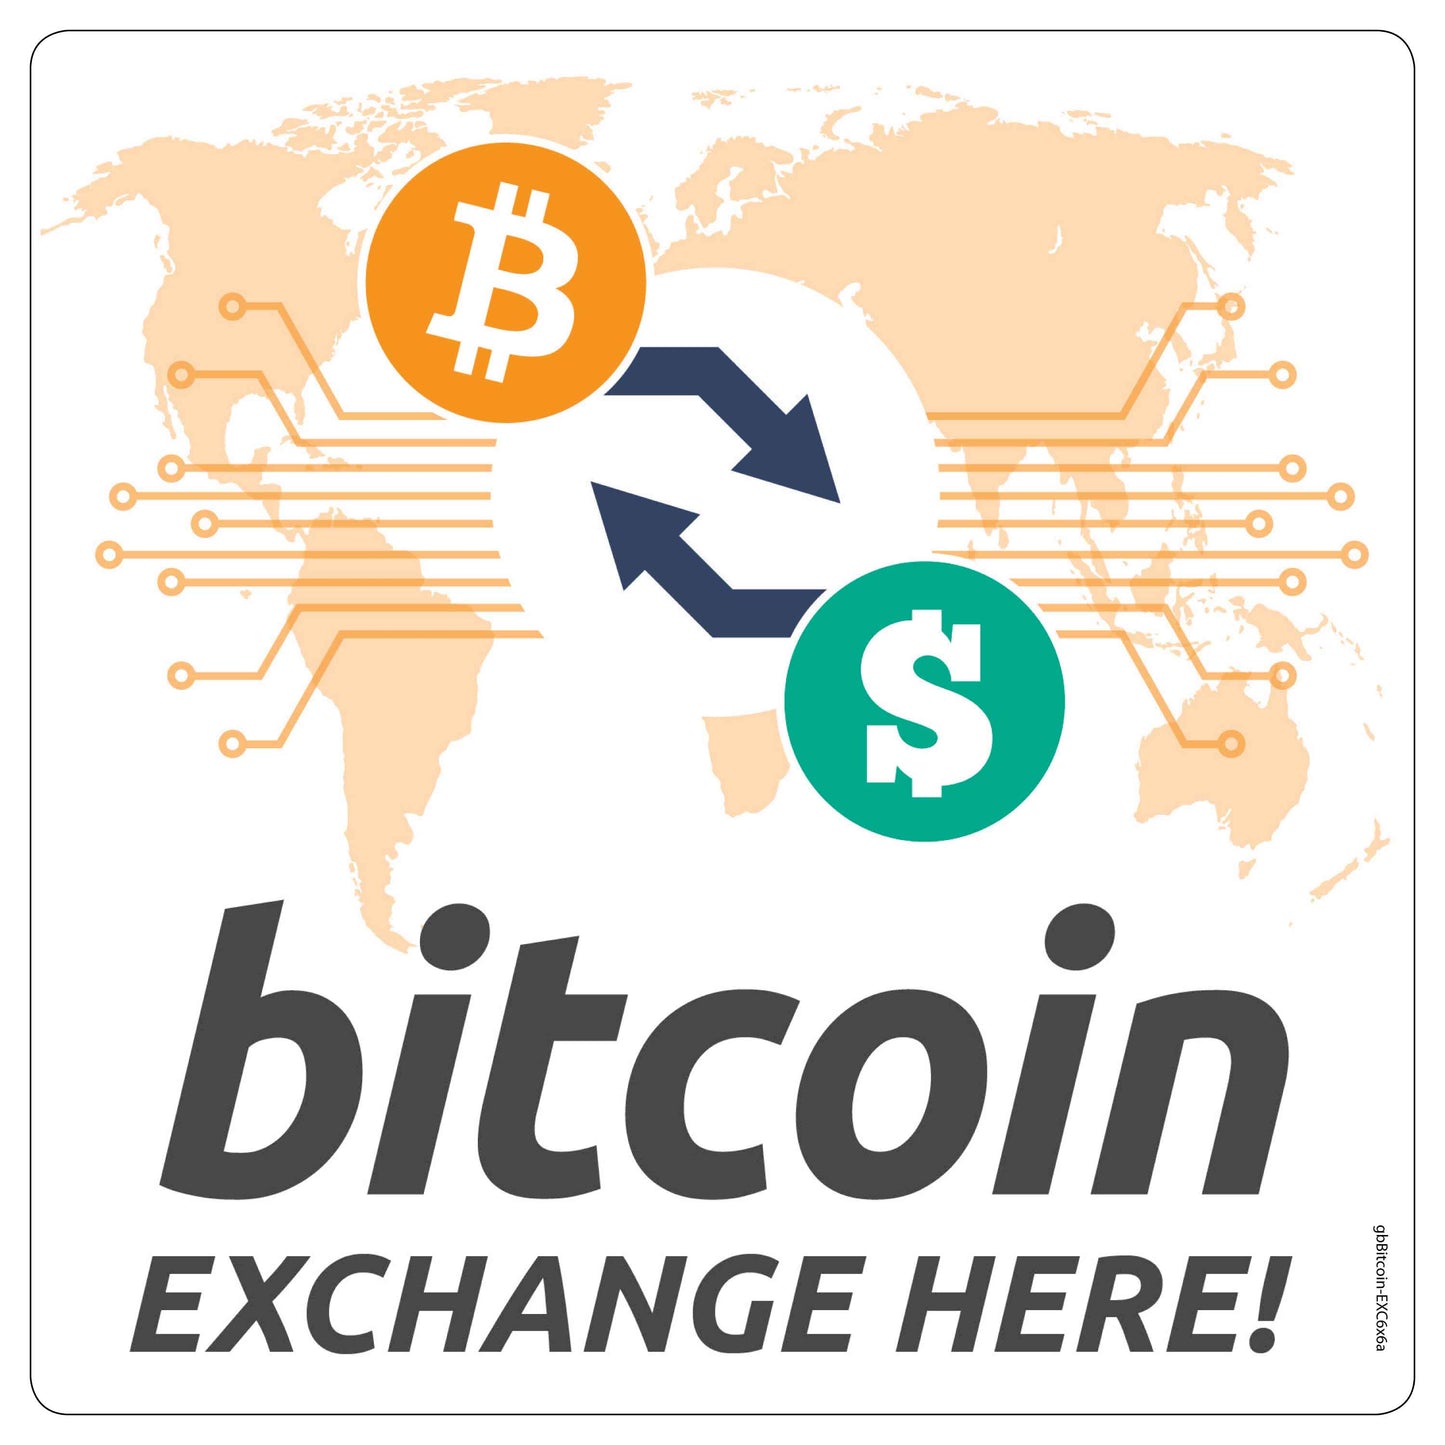 Bitcoin Exchange Here Decal. 6 inches by 6 inches in size.  